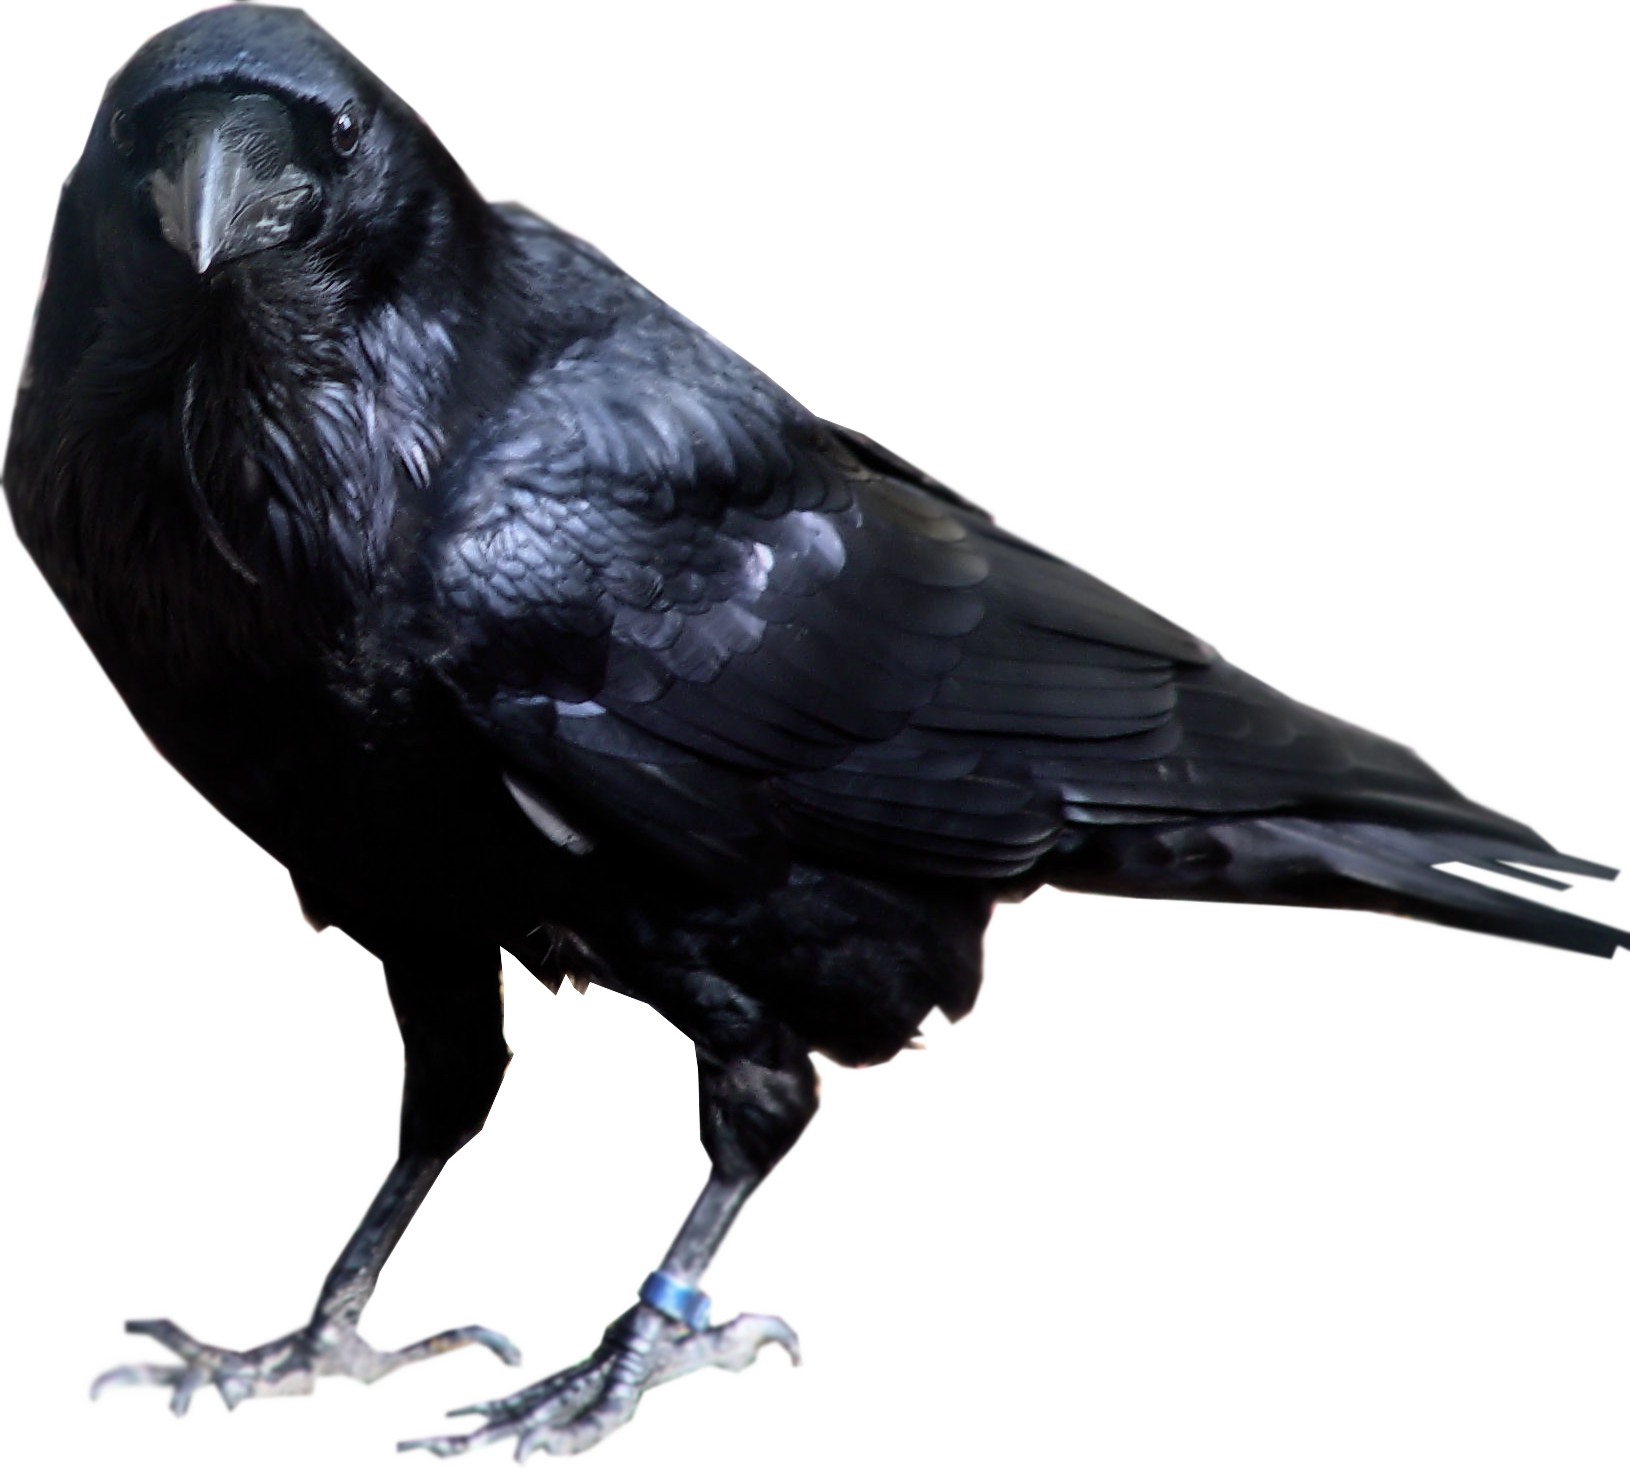 Raven.png